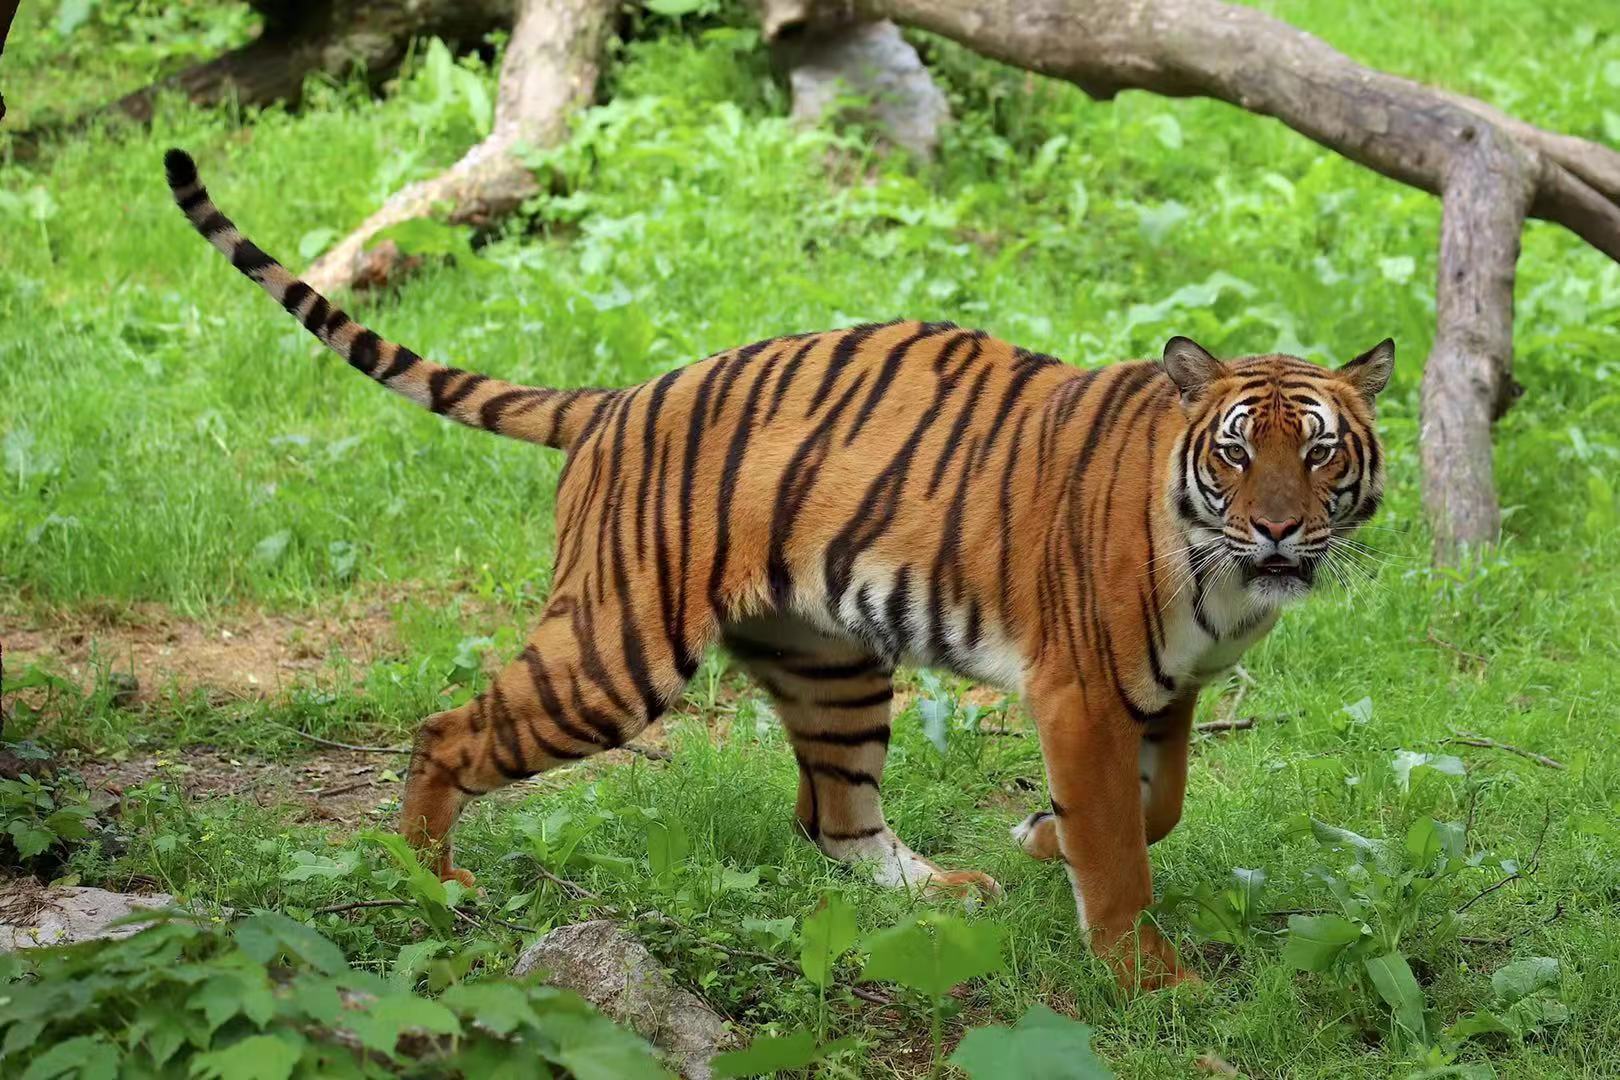 Will the South China tiger make its way back to the wild again? 